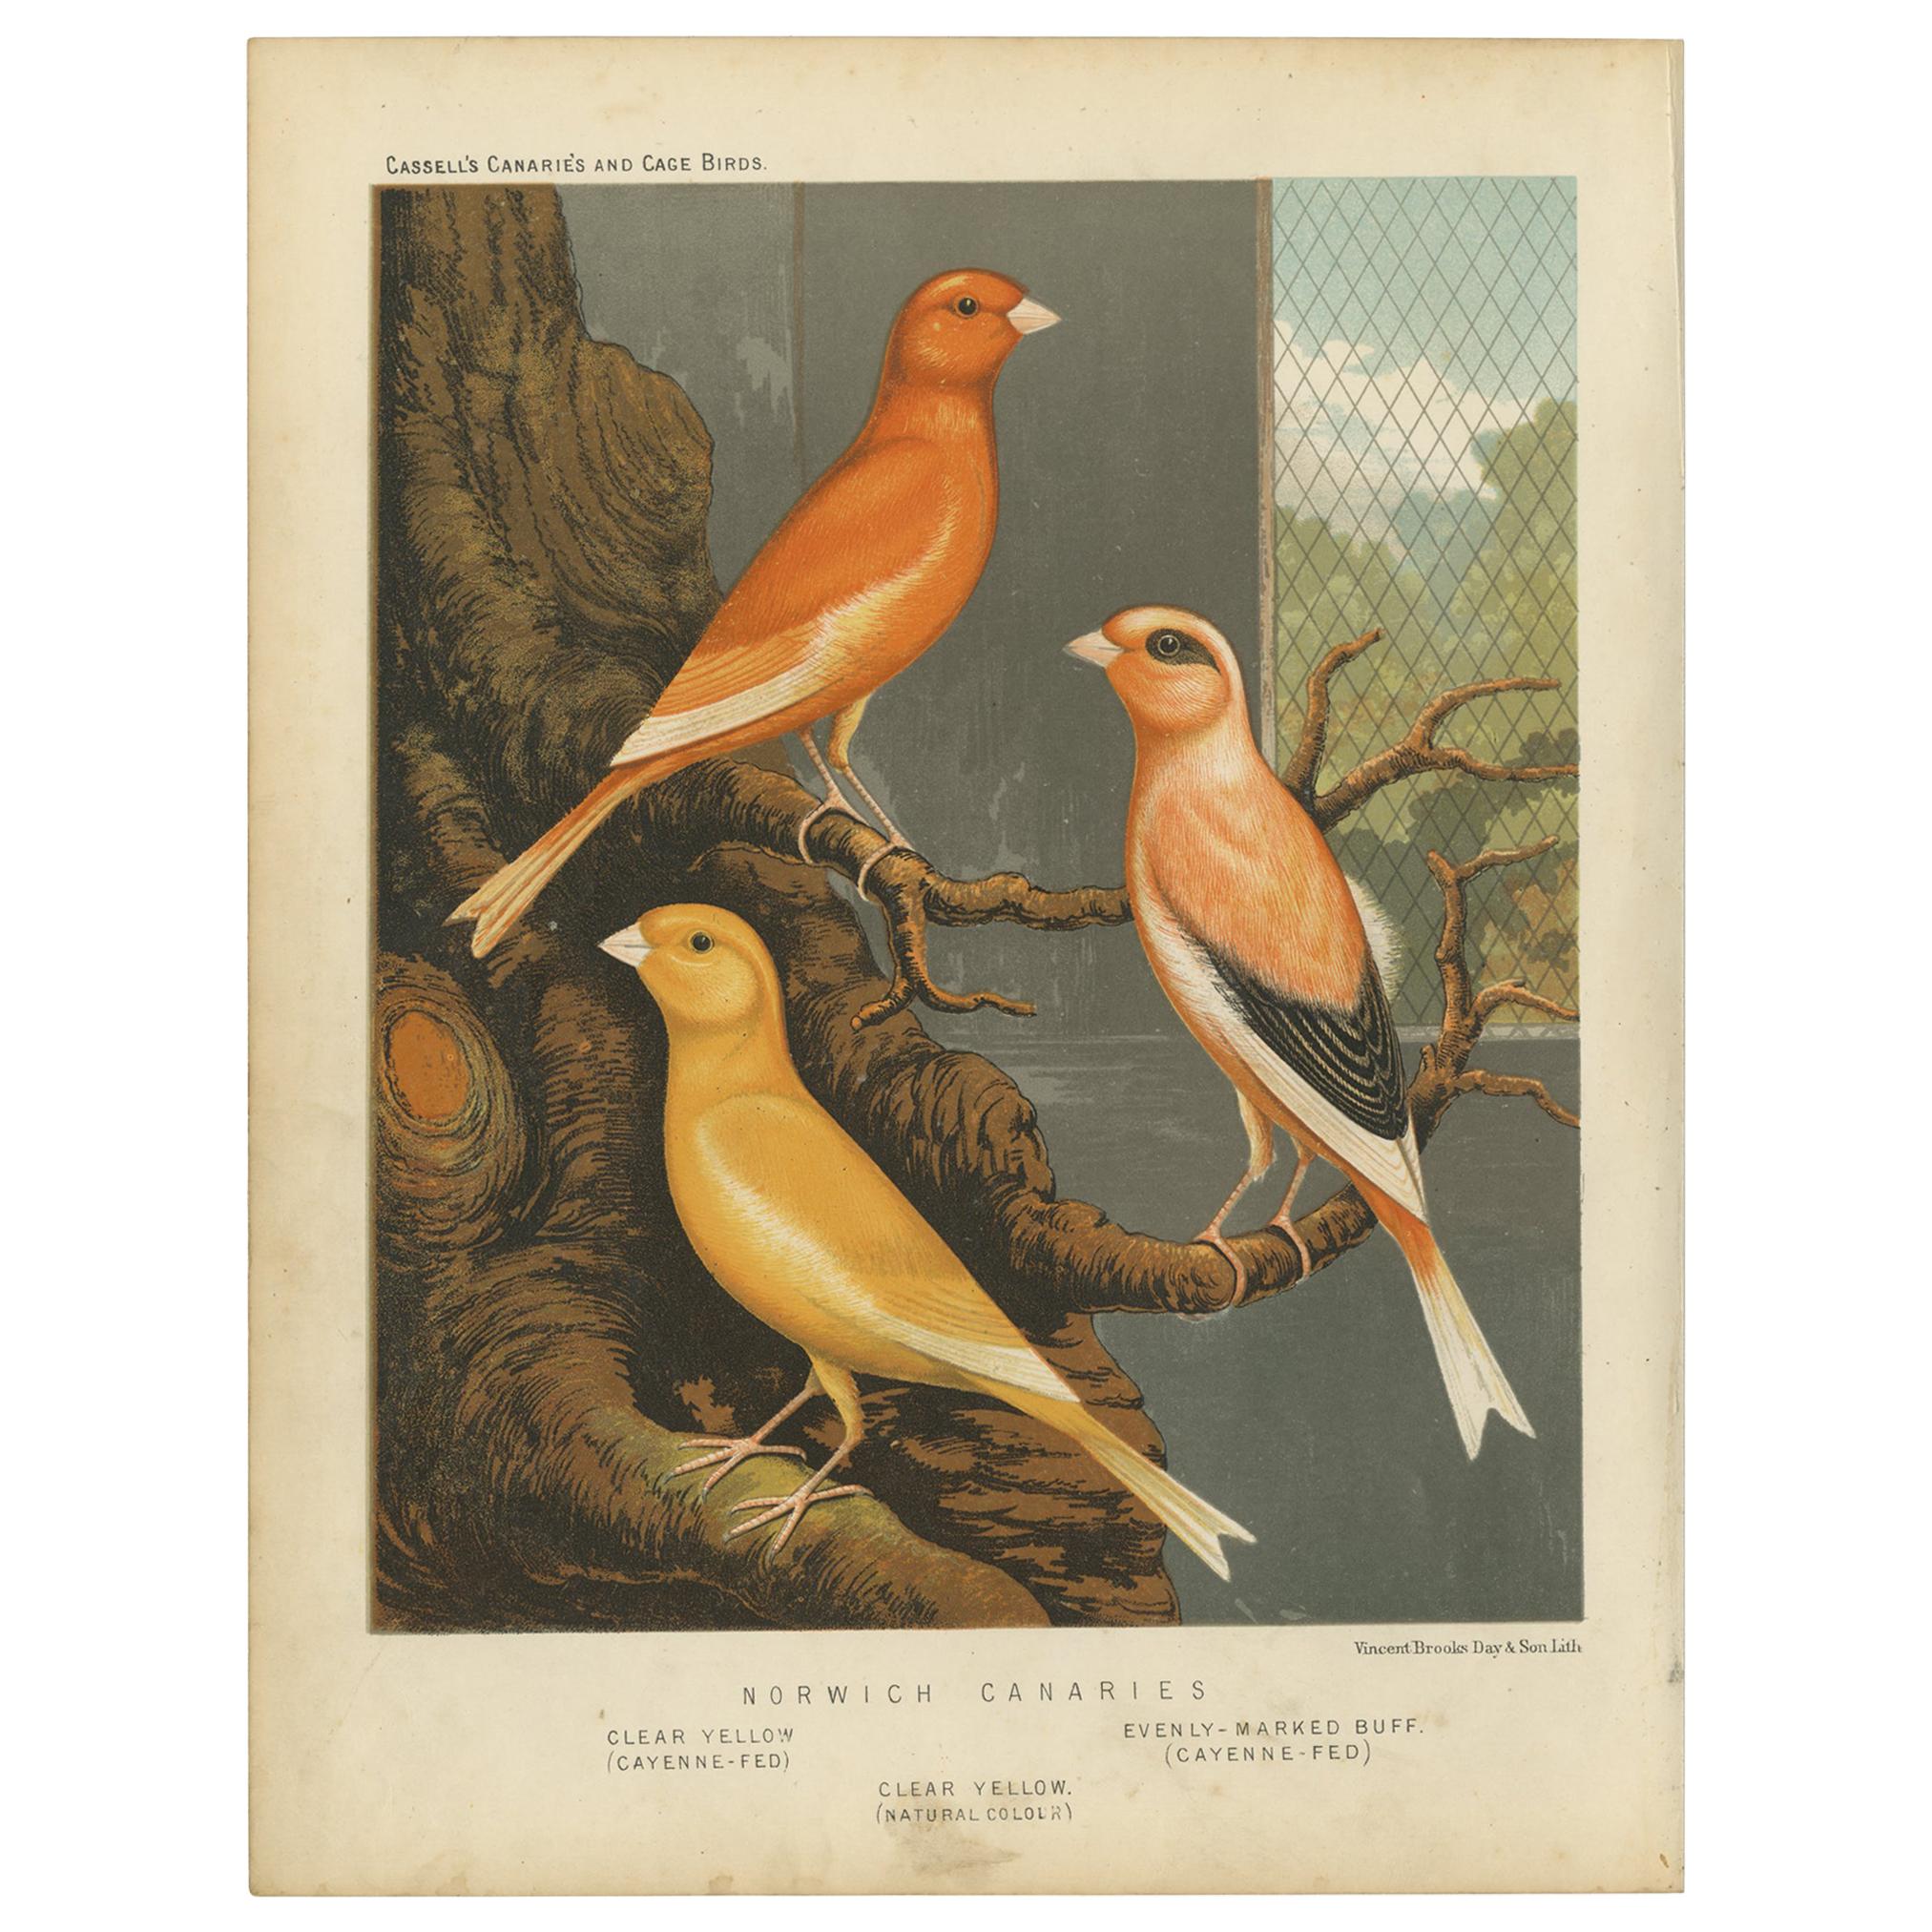 Antique Bird Print of the Norwich Canaries Clear Yellow 'Cayanne-Fed' and Other For Sale